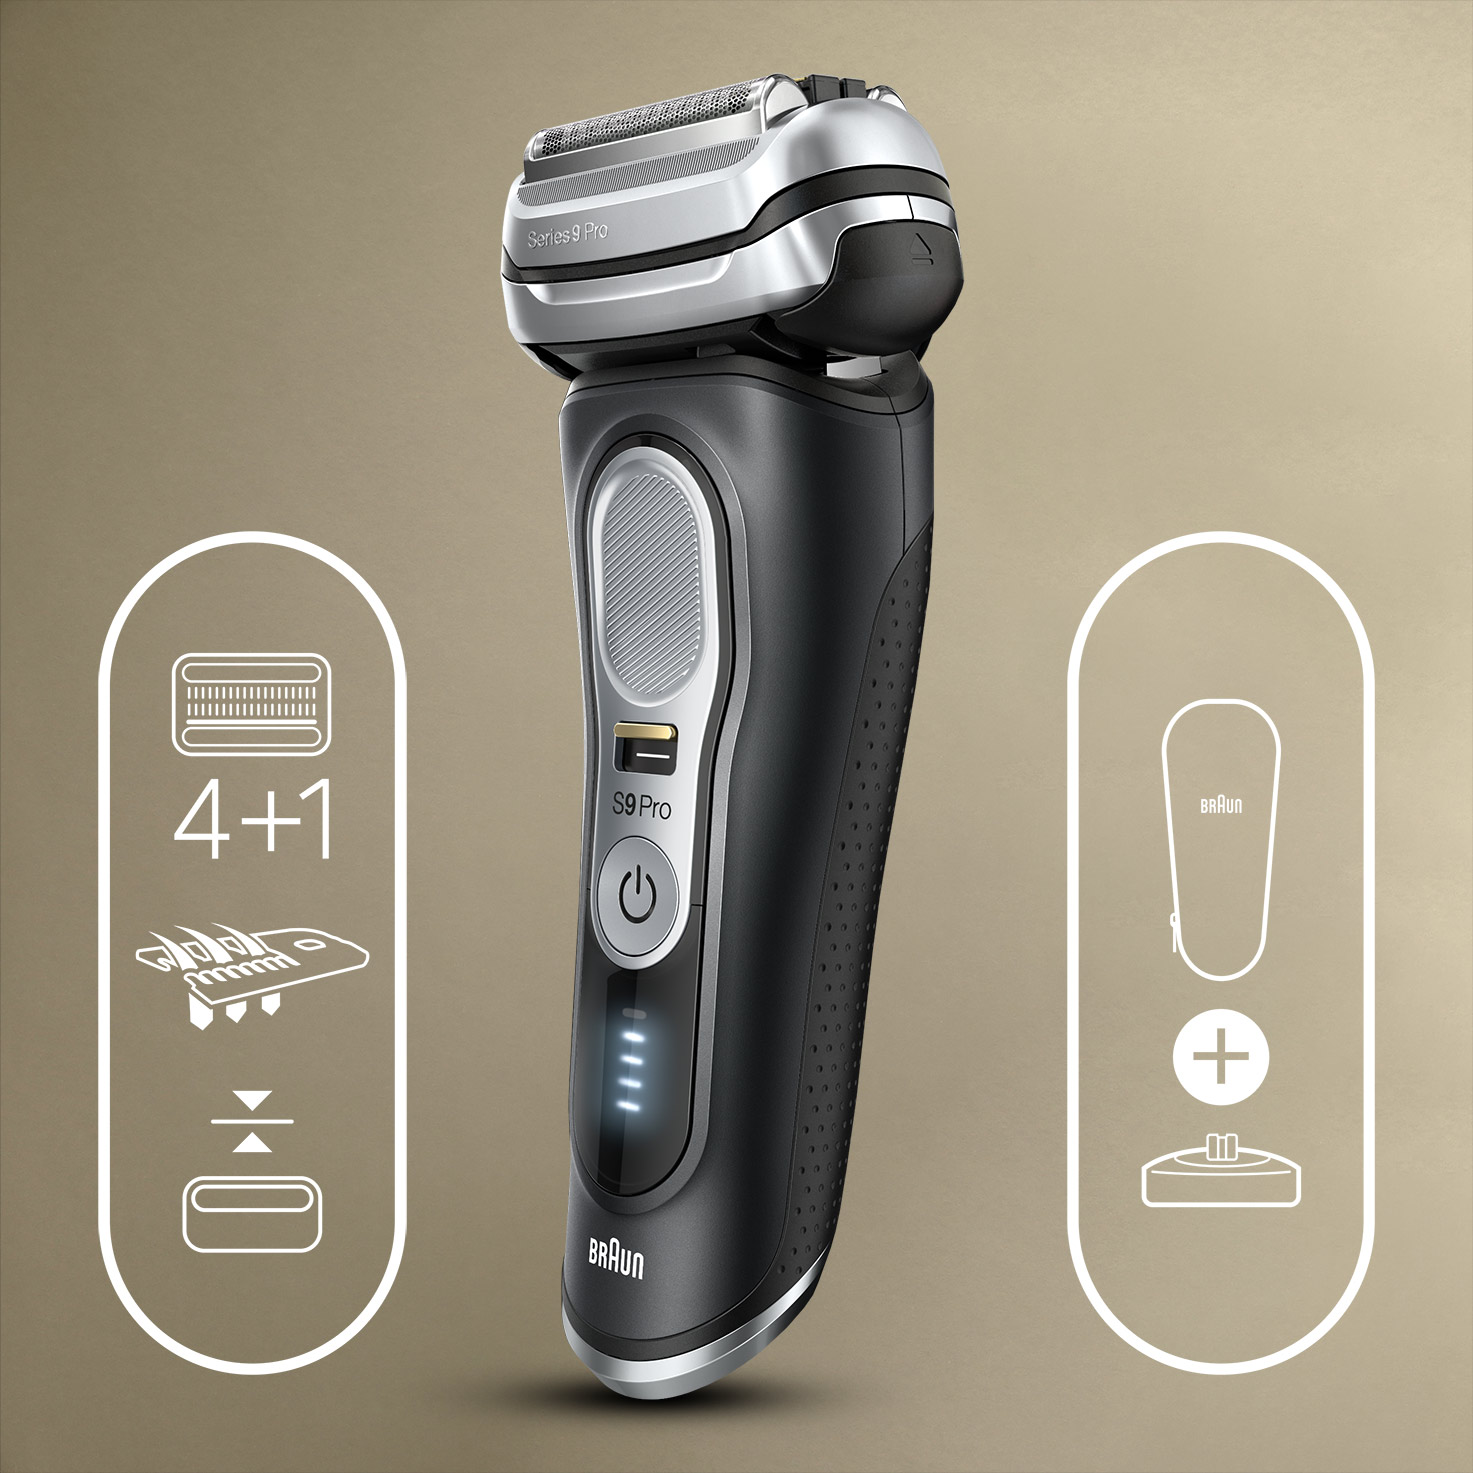 Series 9 Pro 9410s Wet & Dry shaver with charging stand and travel